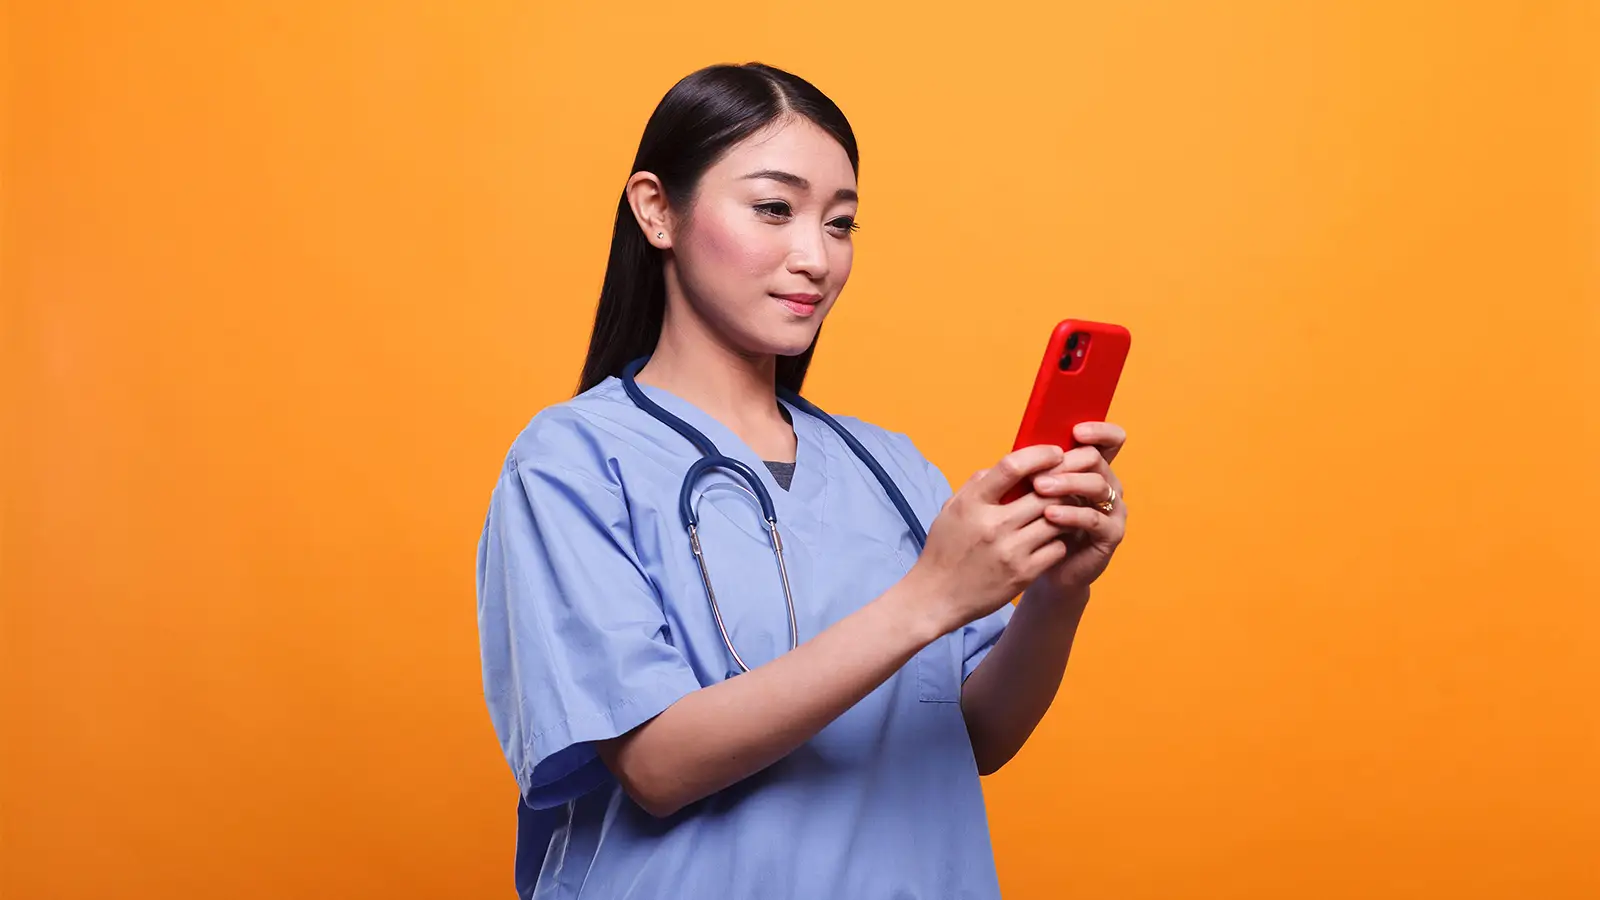 MedPage Today Names Dr. Mariano One of 11 Asian/Pacific American Healthcare Professionals You Should Follow on Social Media